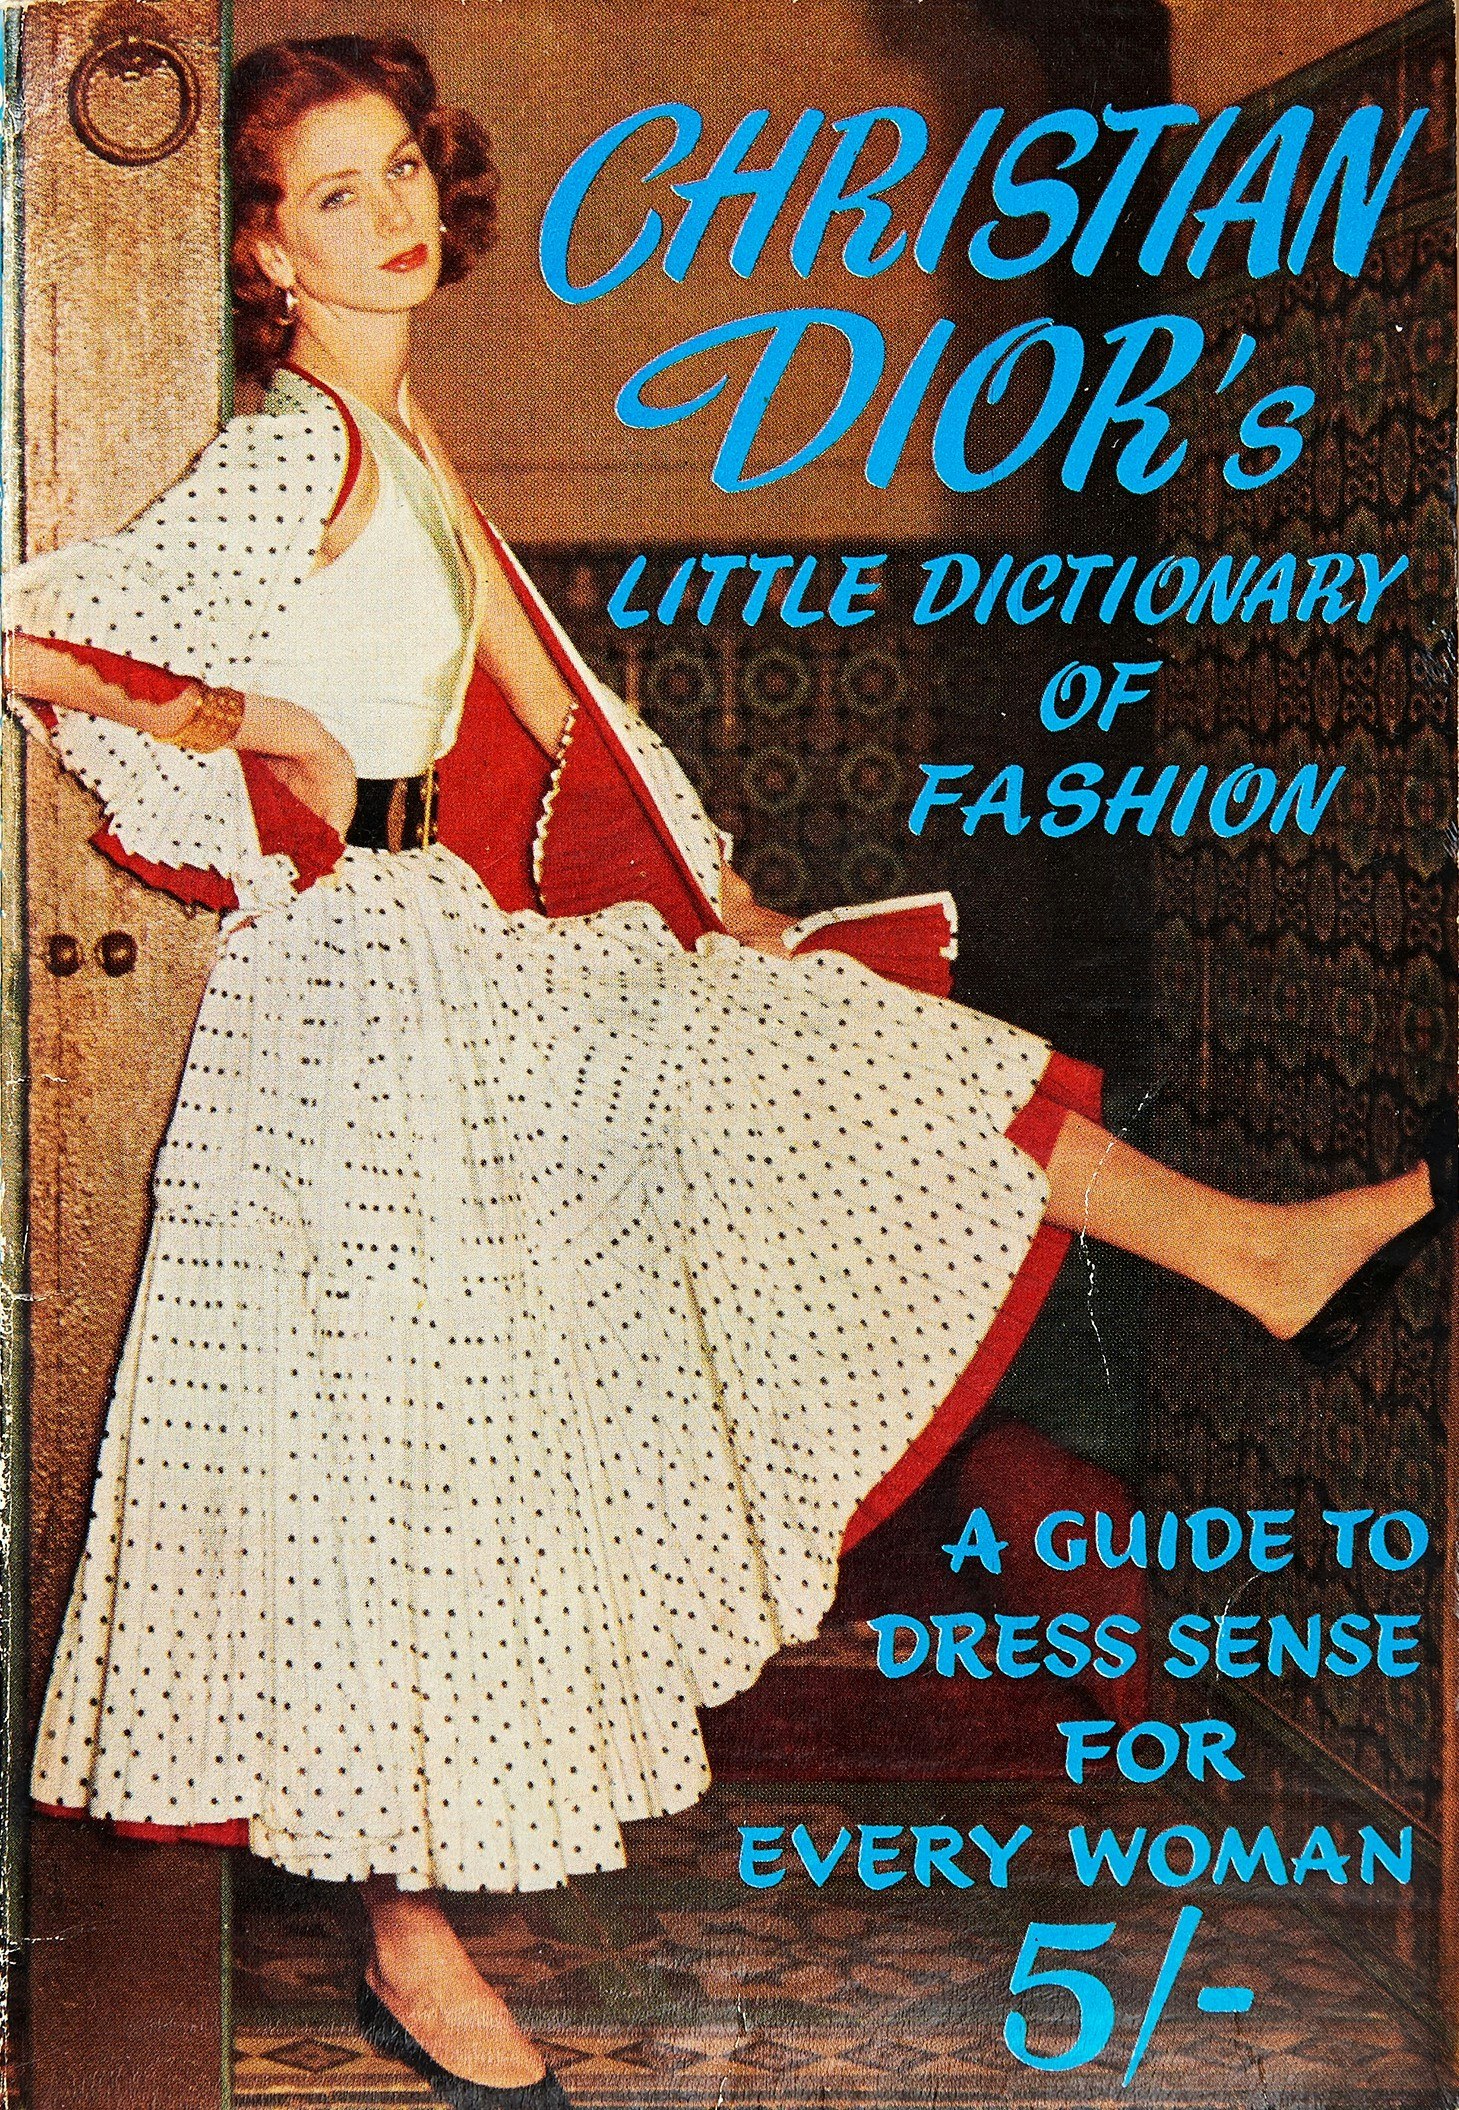 SLIDE 1 little dictionnary of fashion